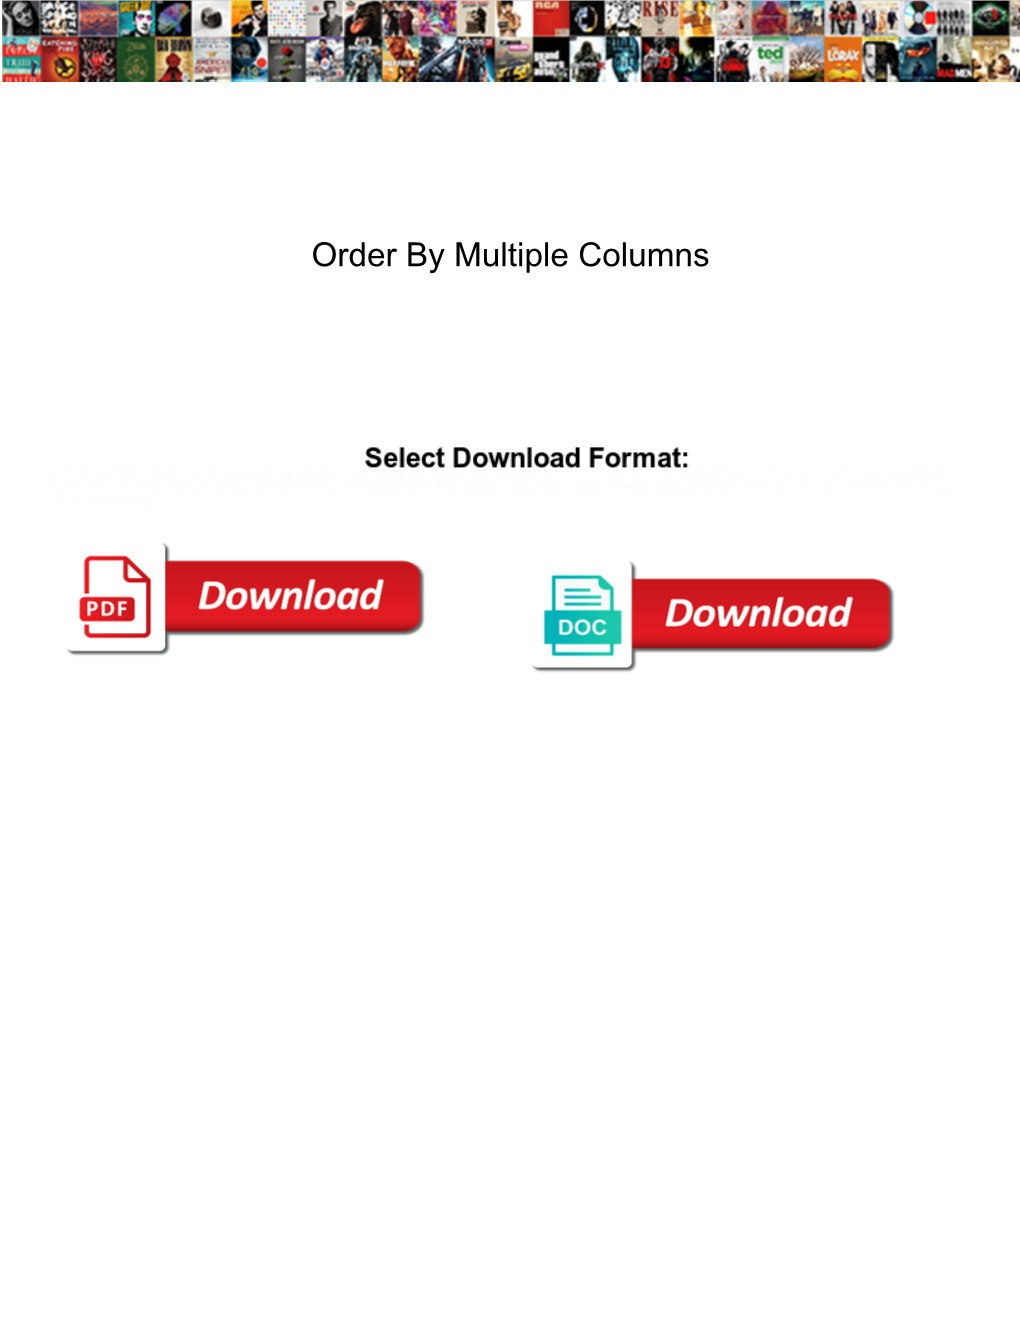 Order by Multiple Columns